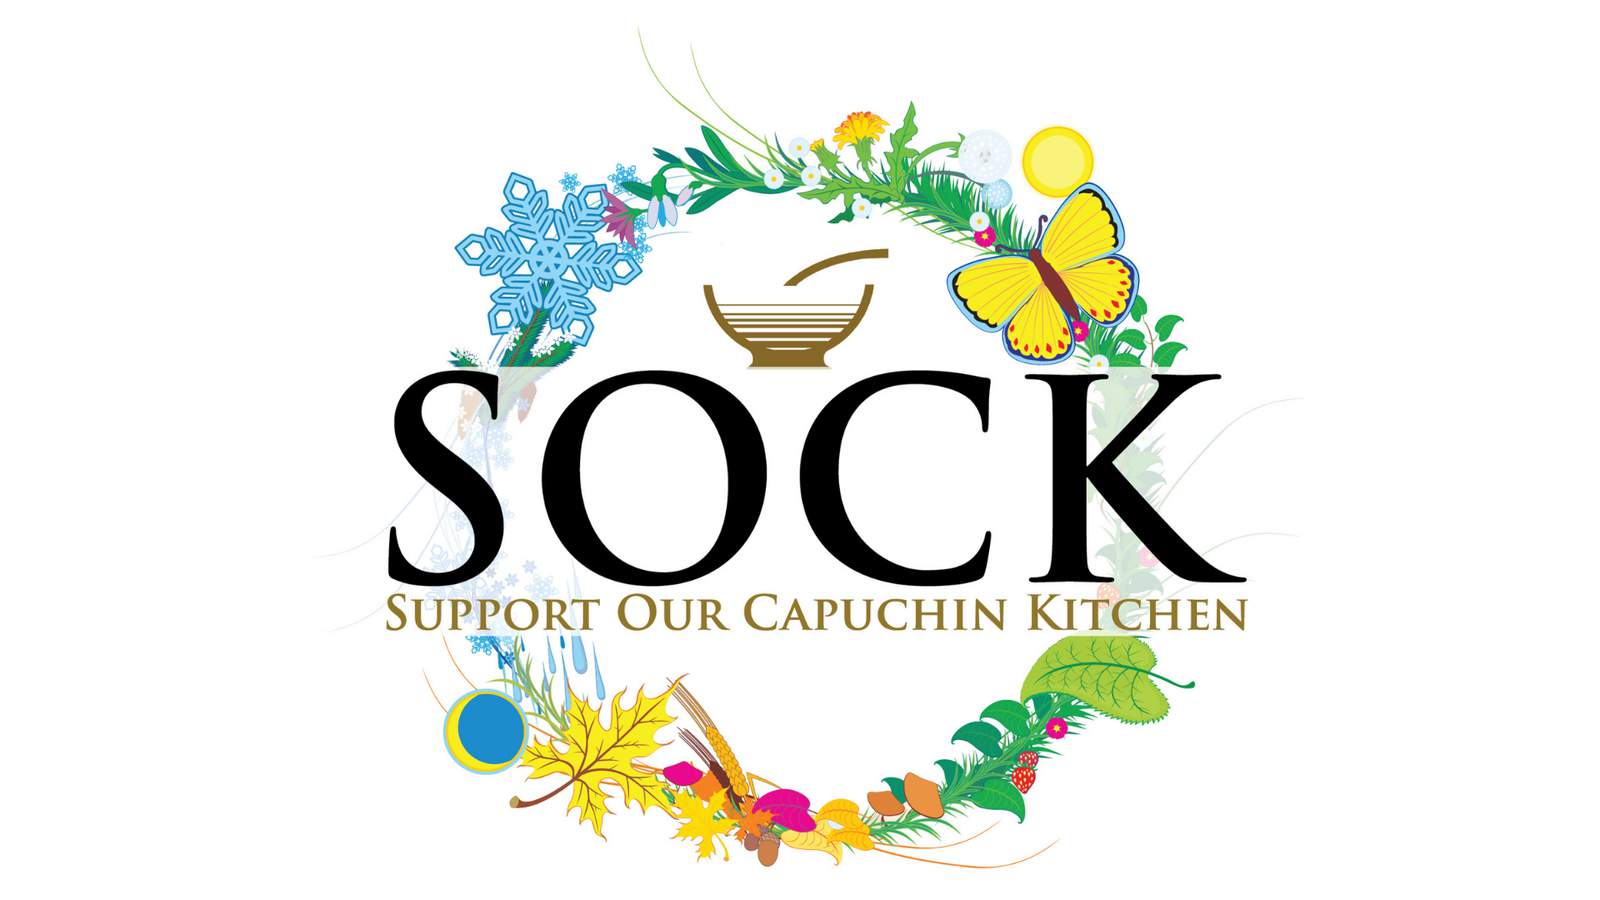 Local 4 to host 48th annual ‘Support Our Capuchin Kitchen’ Telethon on Oct. 1